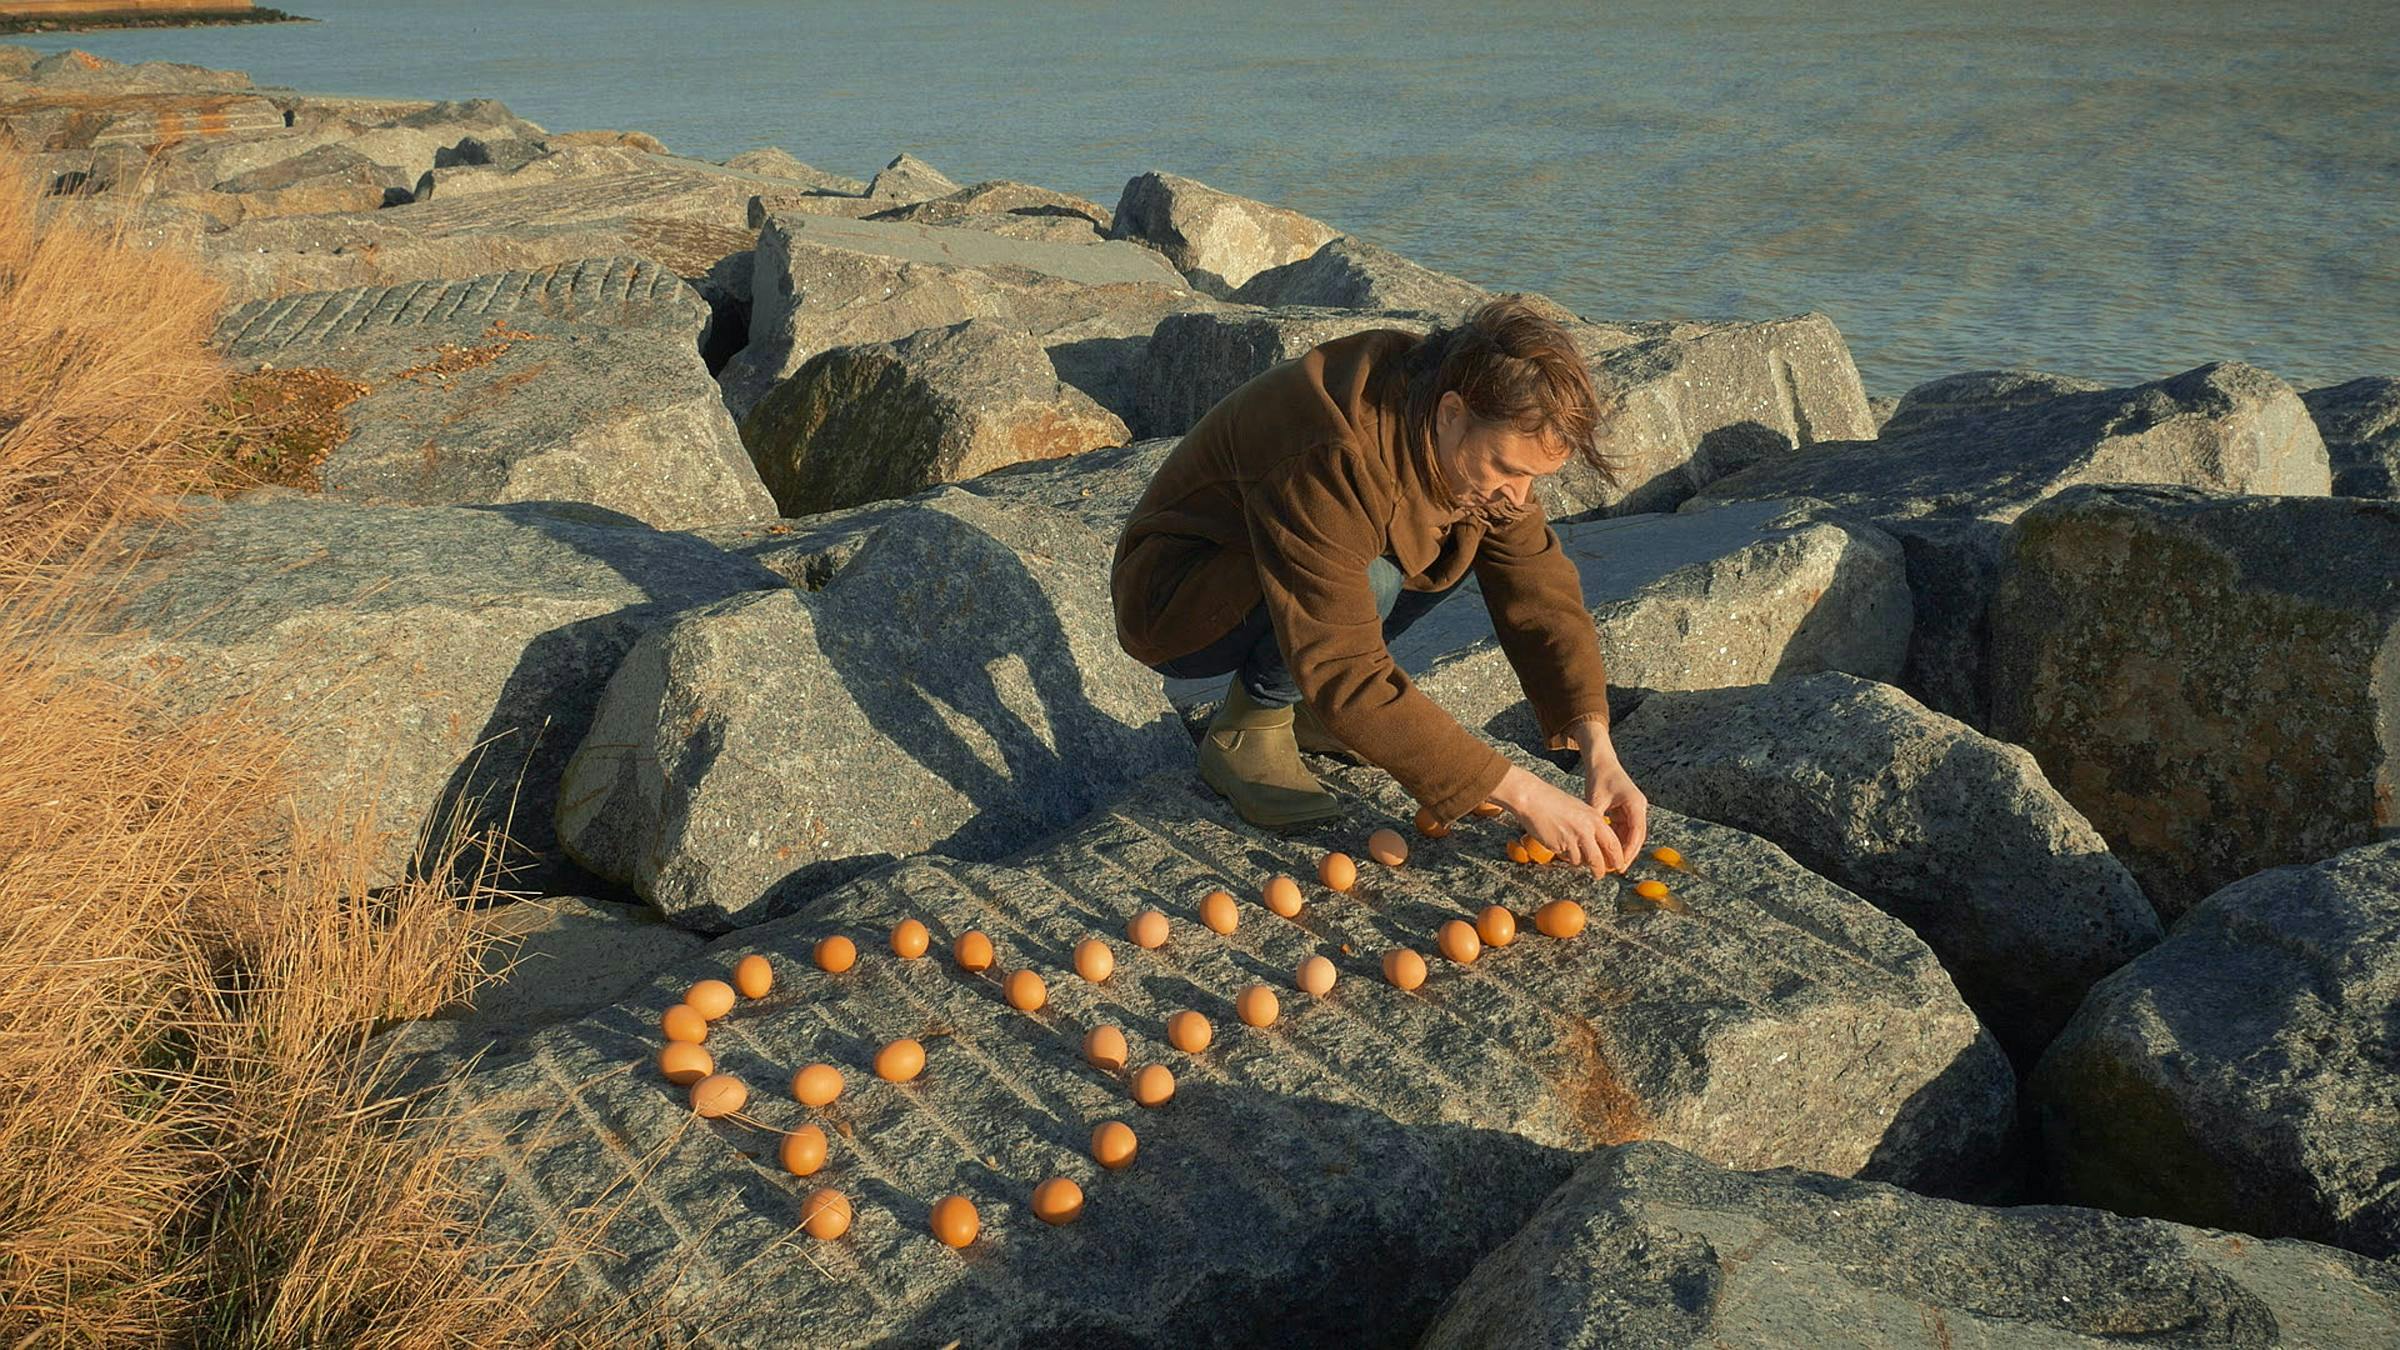 A person wearing brown clothes arranges lots of eggs on a rock in front of the ocean.